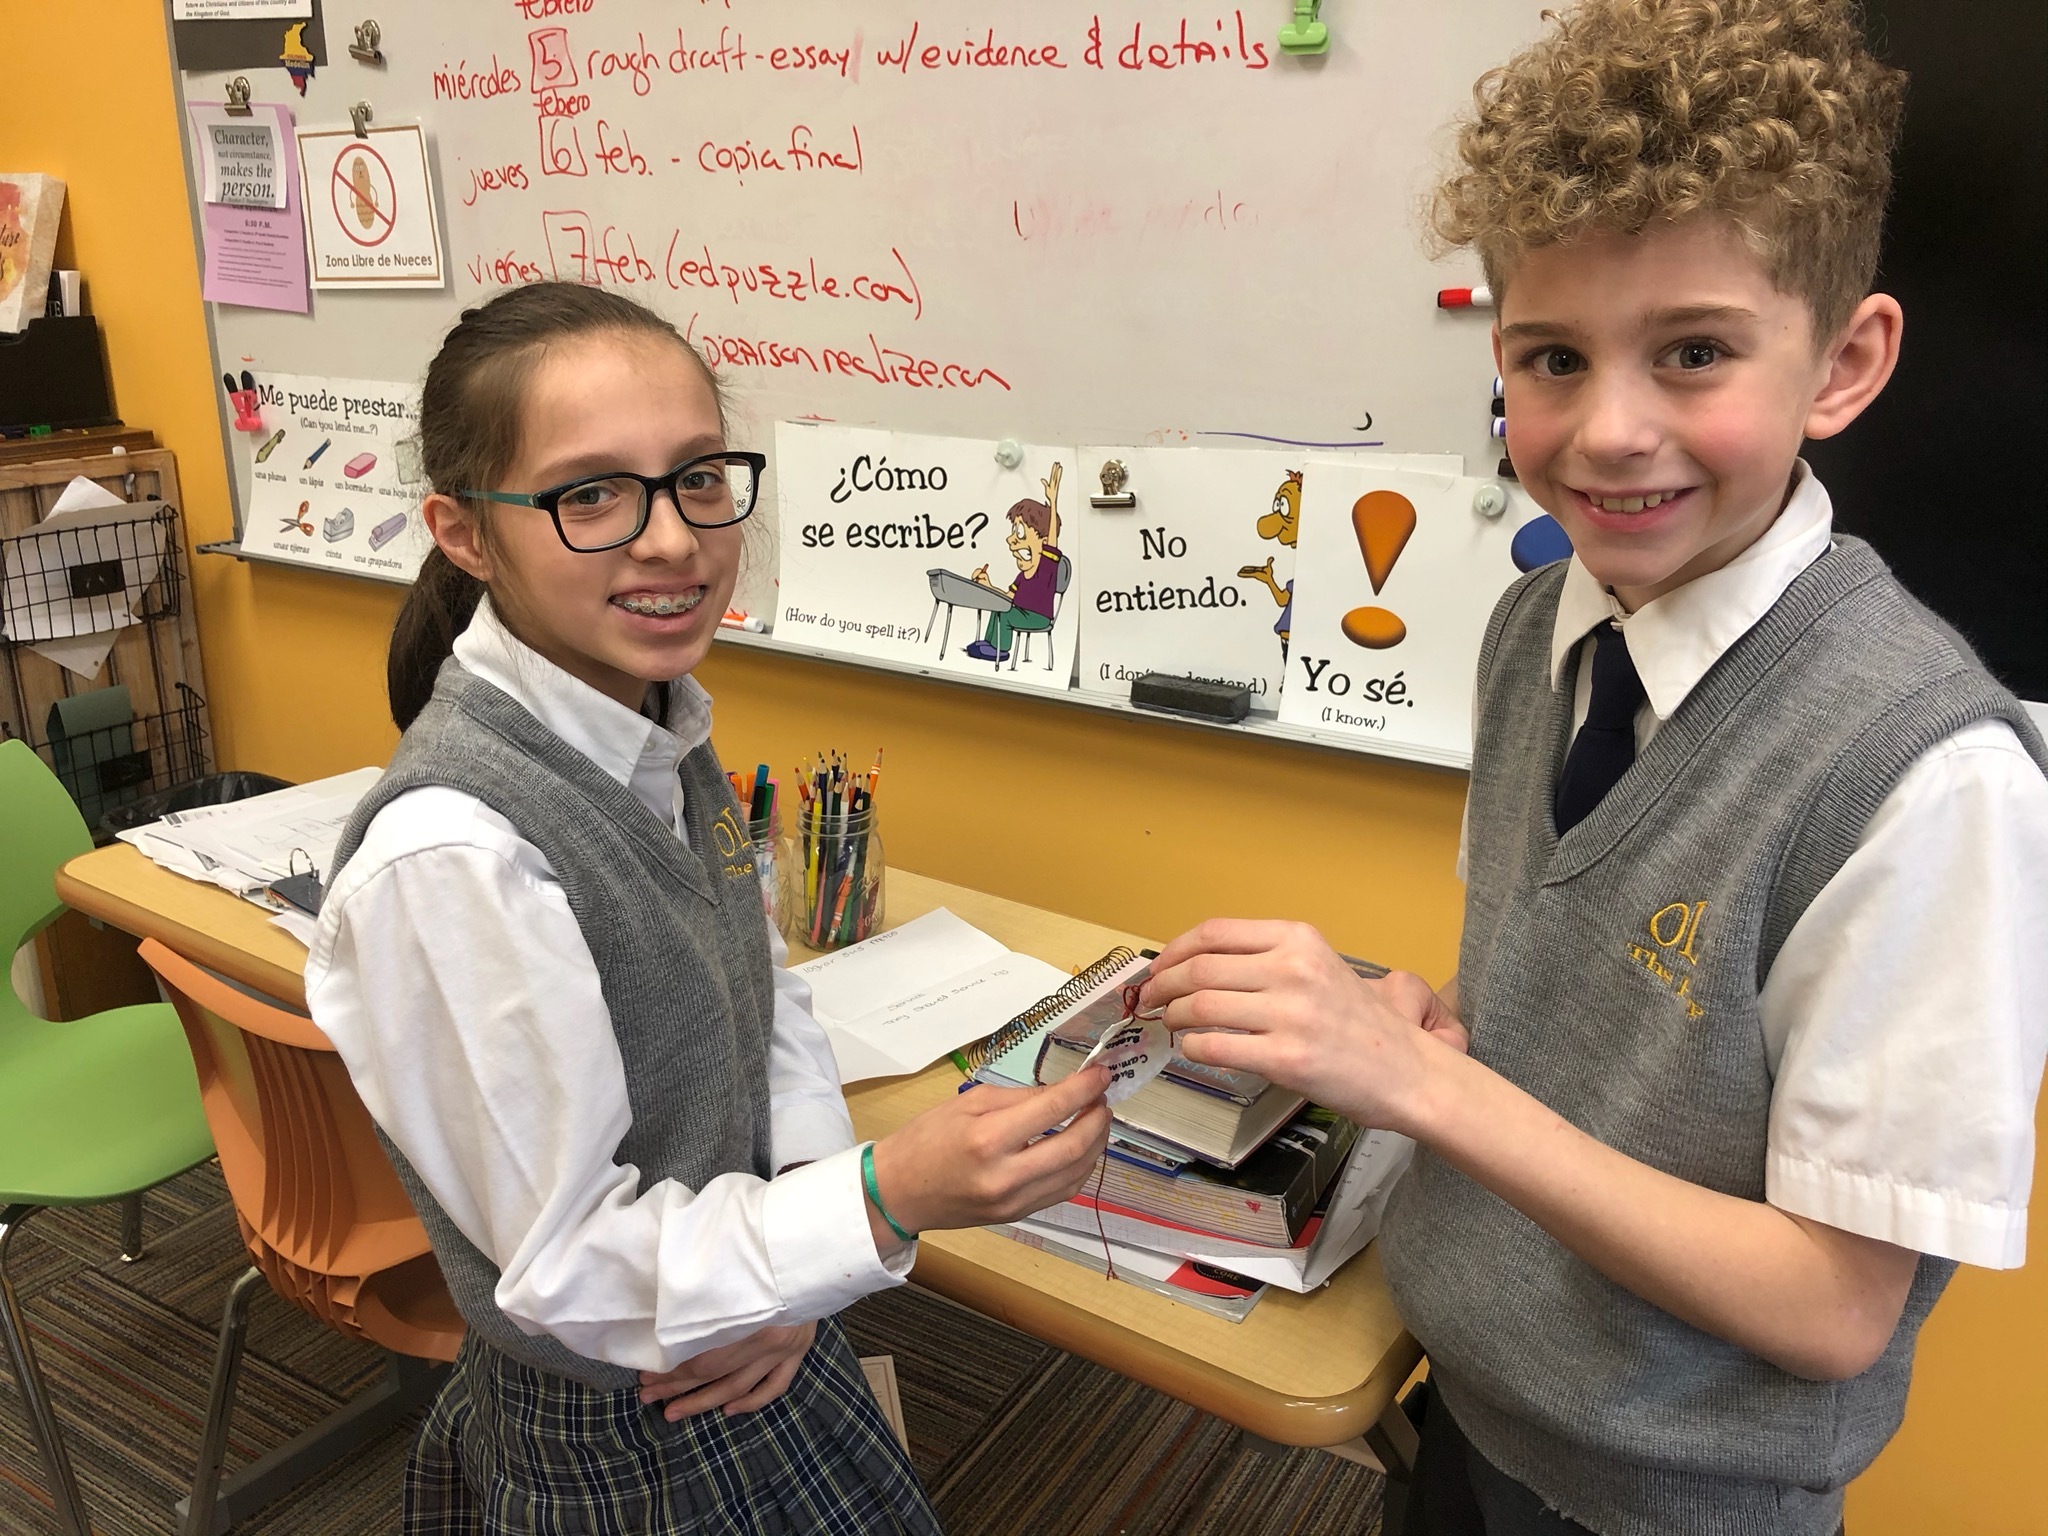 Our Lady of the Hamptons School sixth-graders Bianca Alvarado and Brian Spellman helped to prepare the identification shells for the pilgrimage project. The mock pilgramage is the culmination of an integrated Spanish, religion, art, history, and geography project.